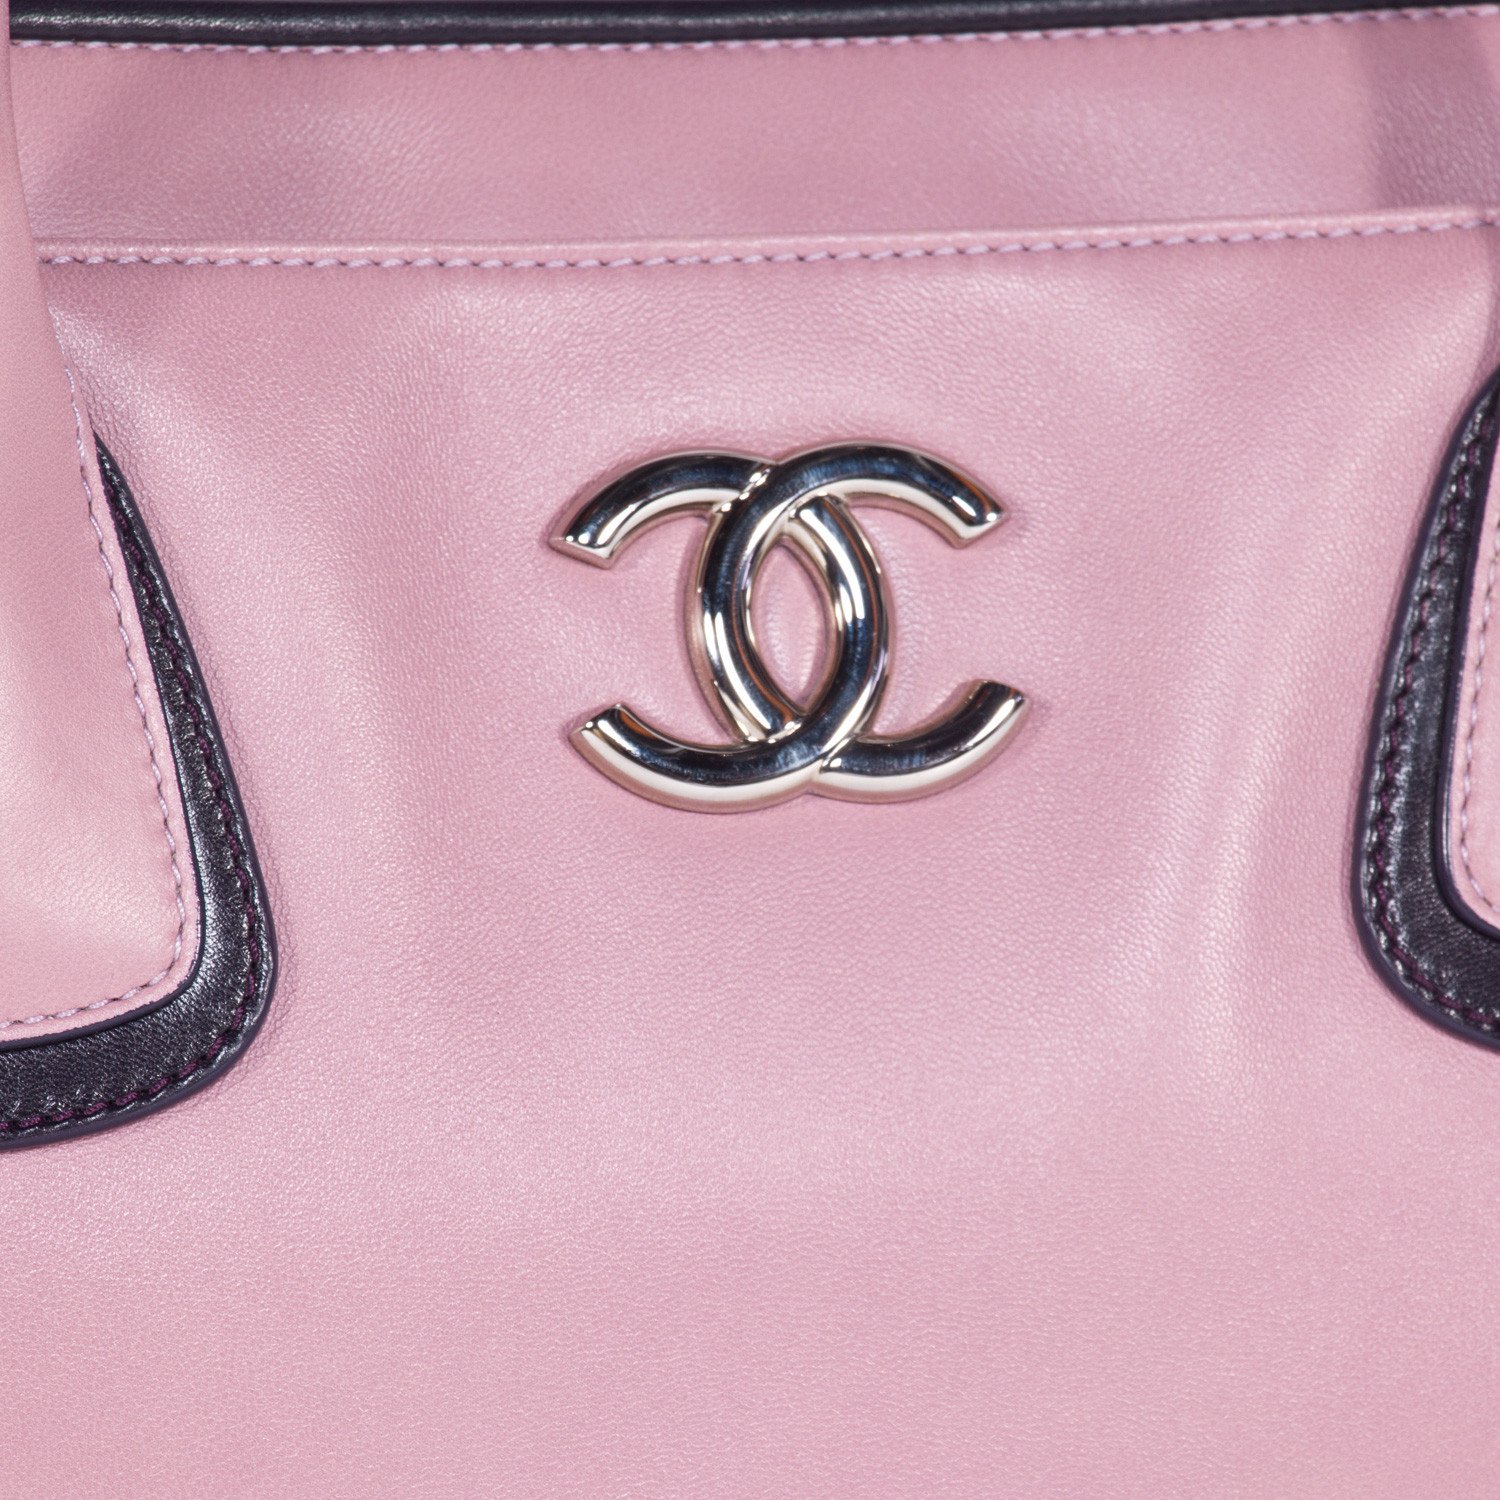 Chanel Pink Leather Large Cerf Executive Tote Bag